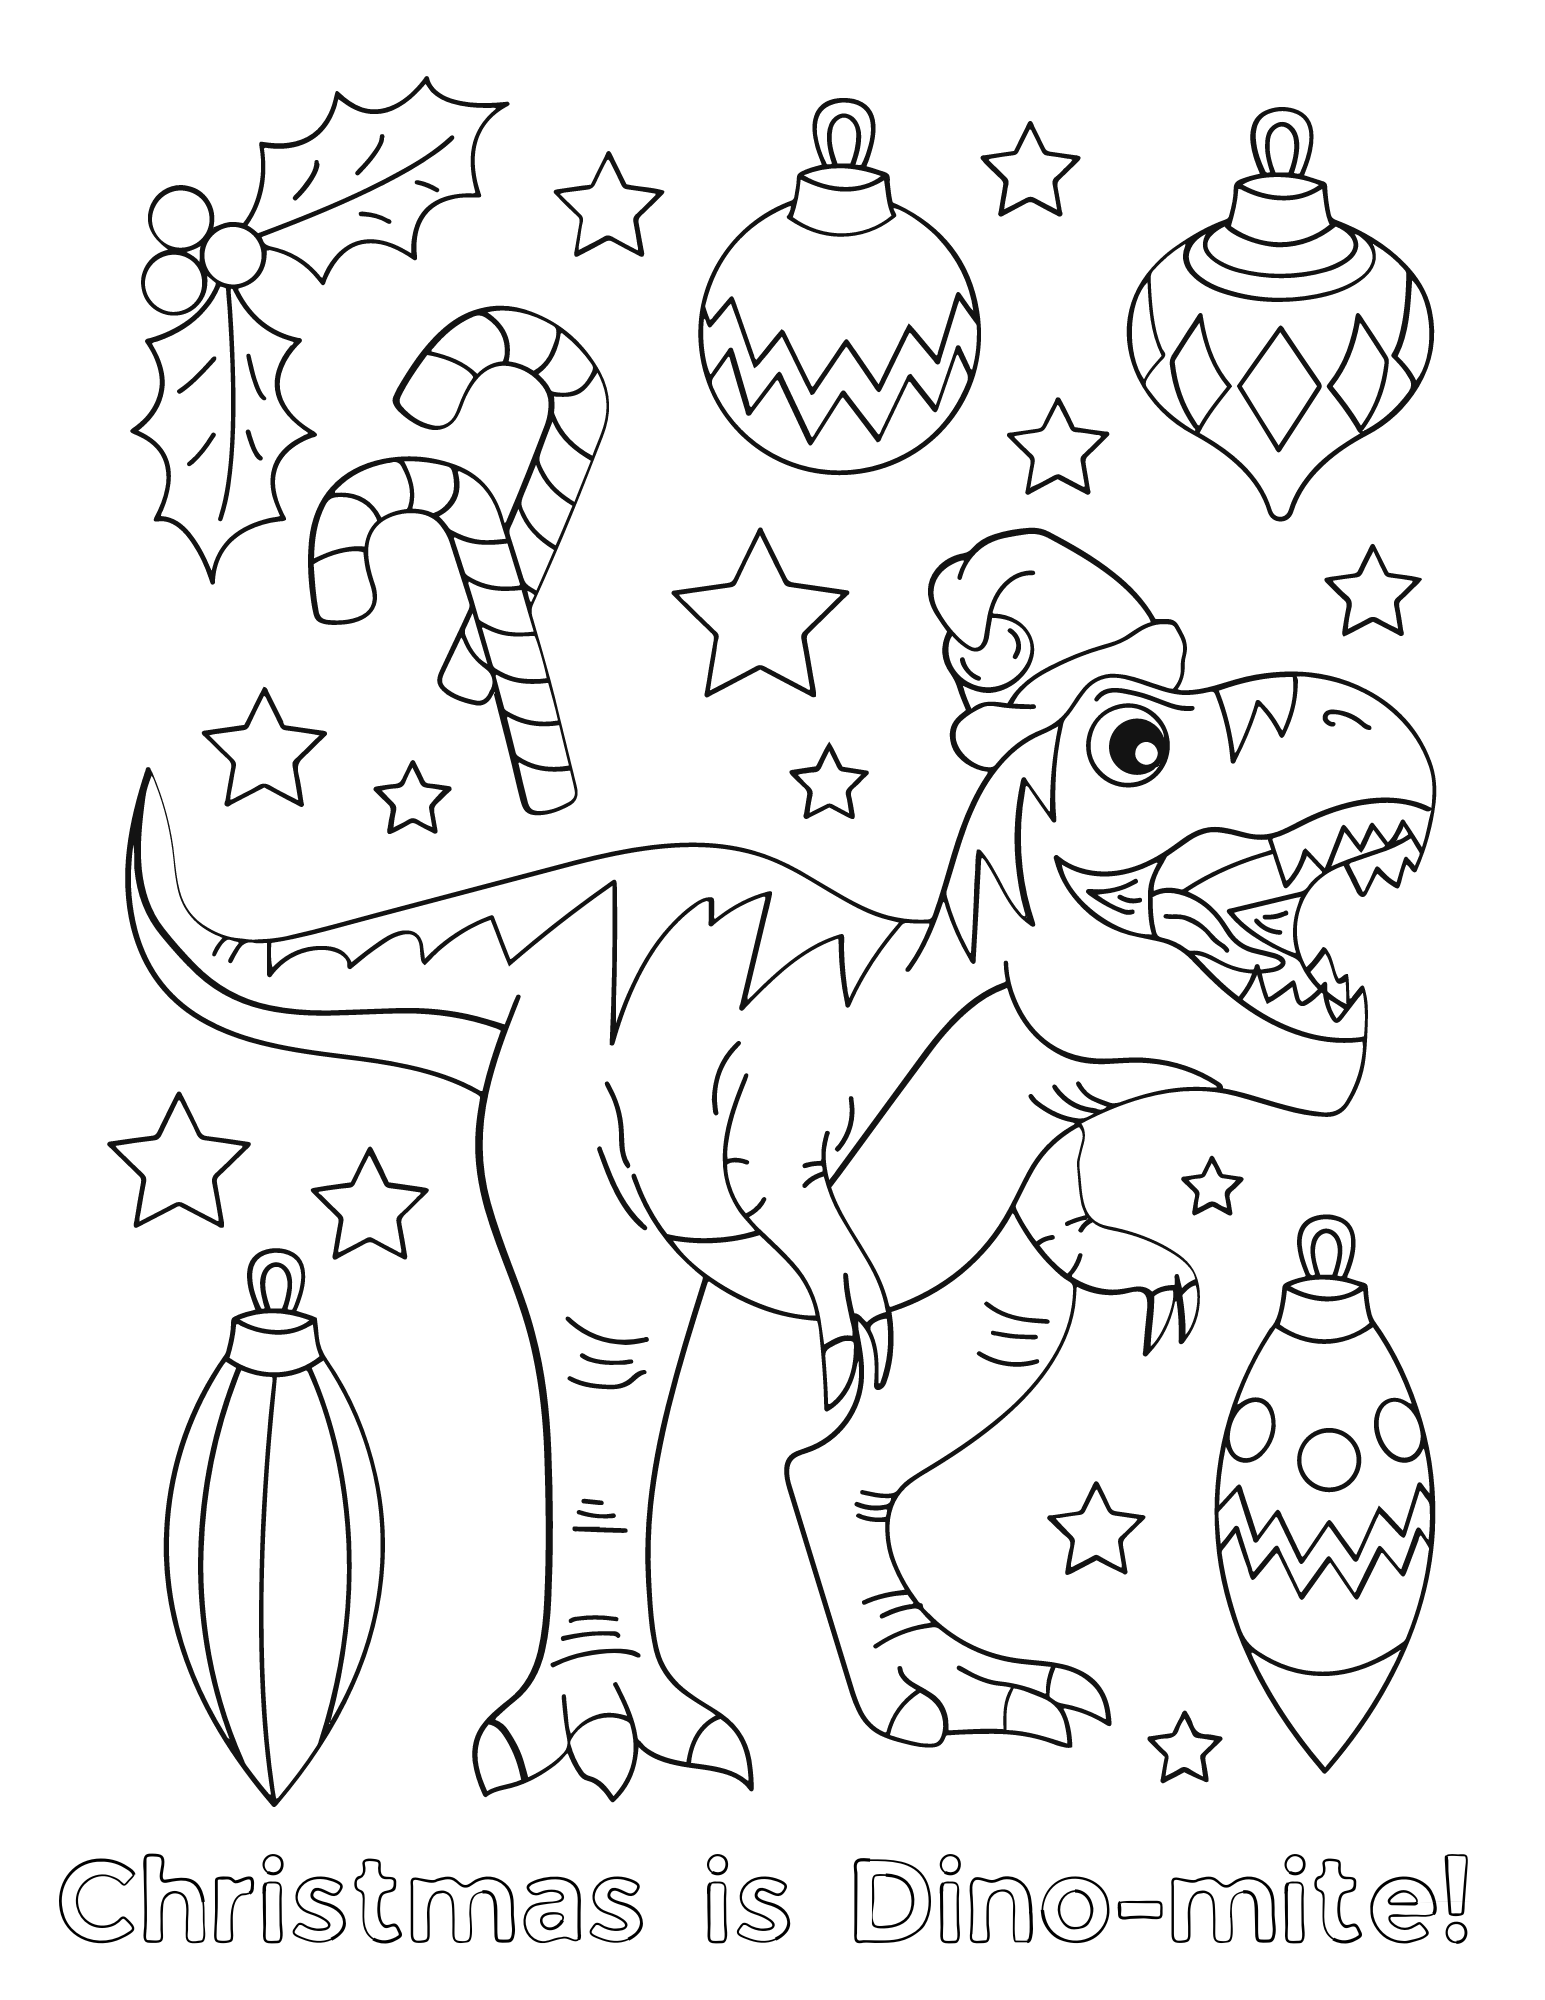 Roar into the holidays with dino